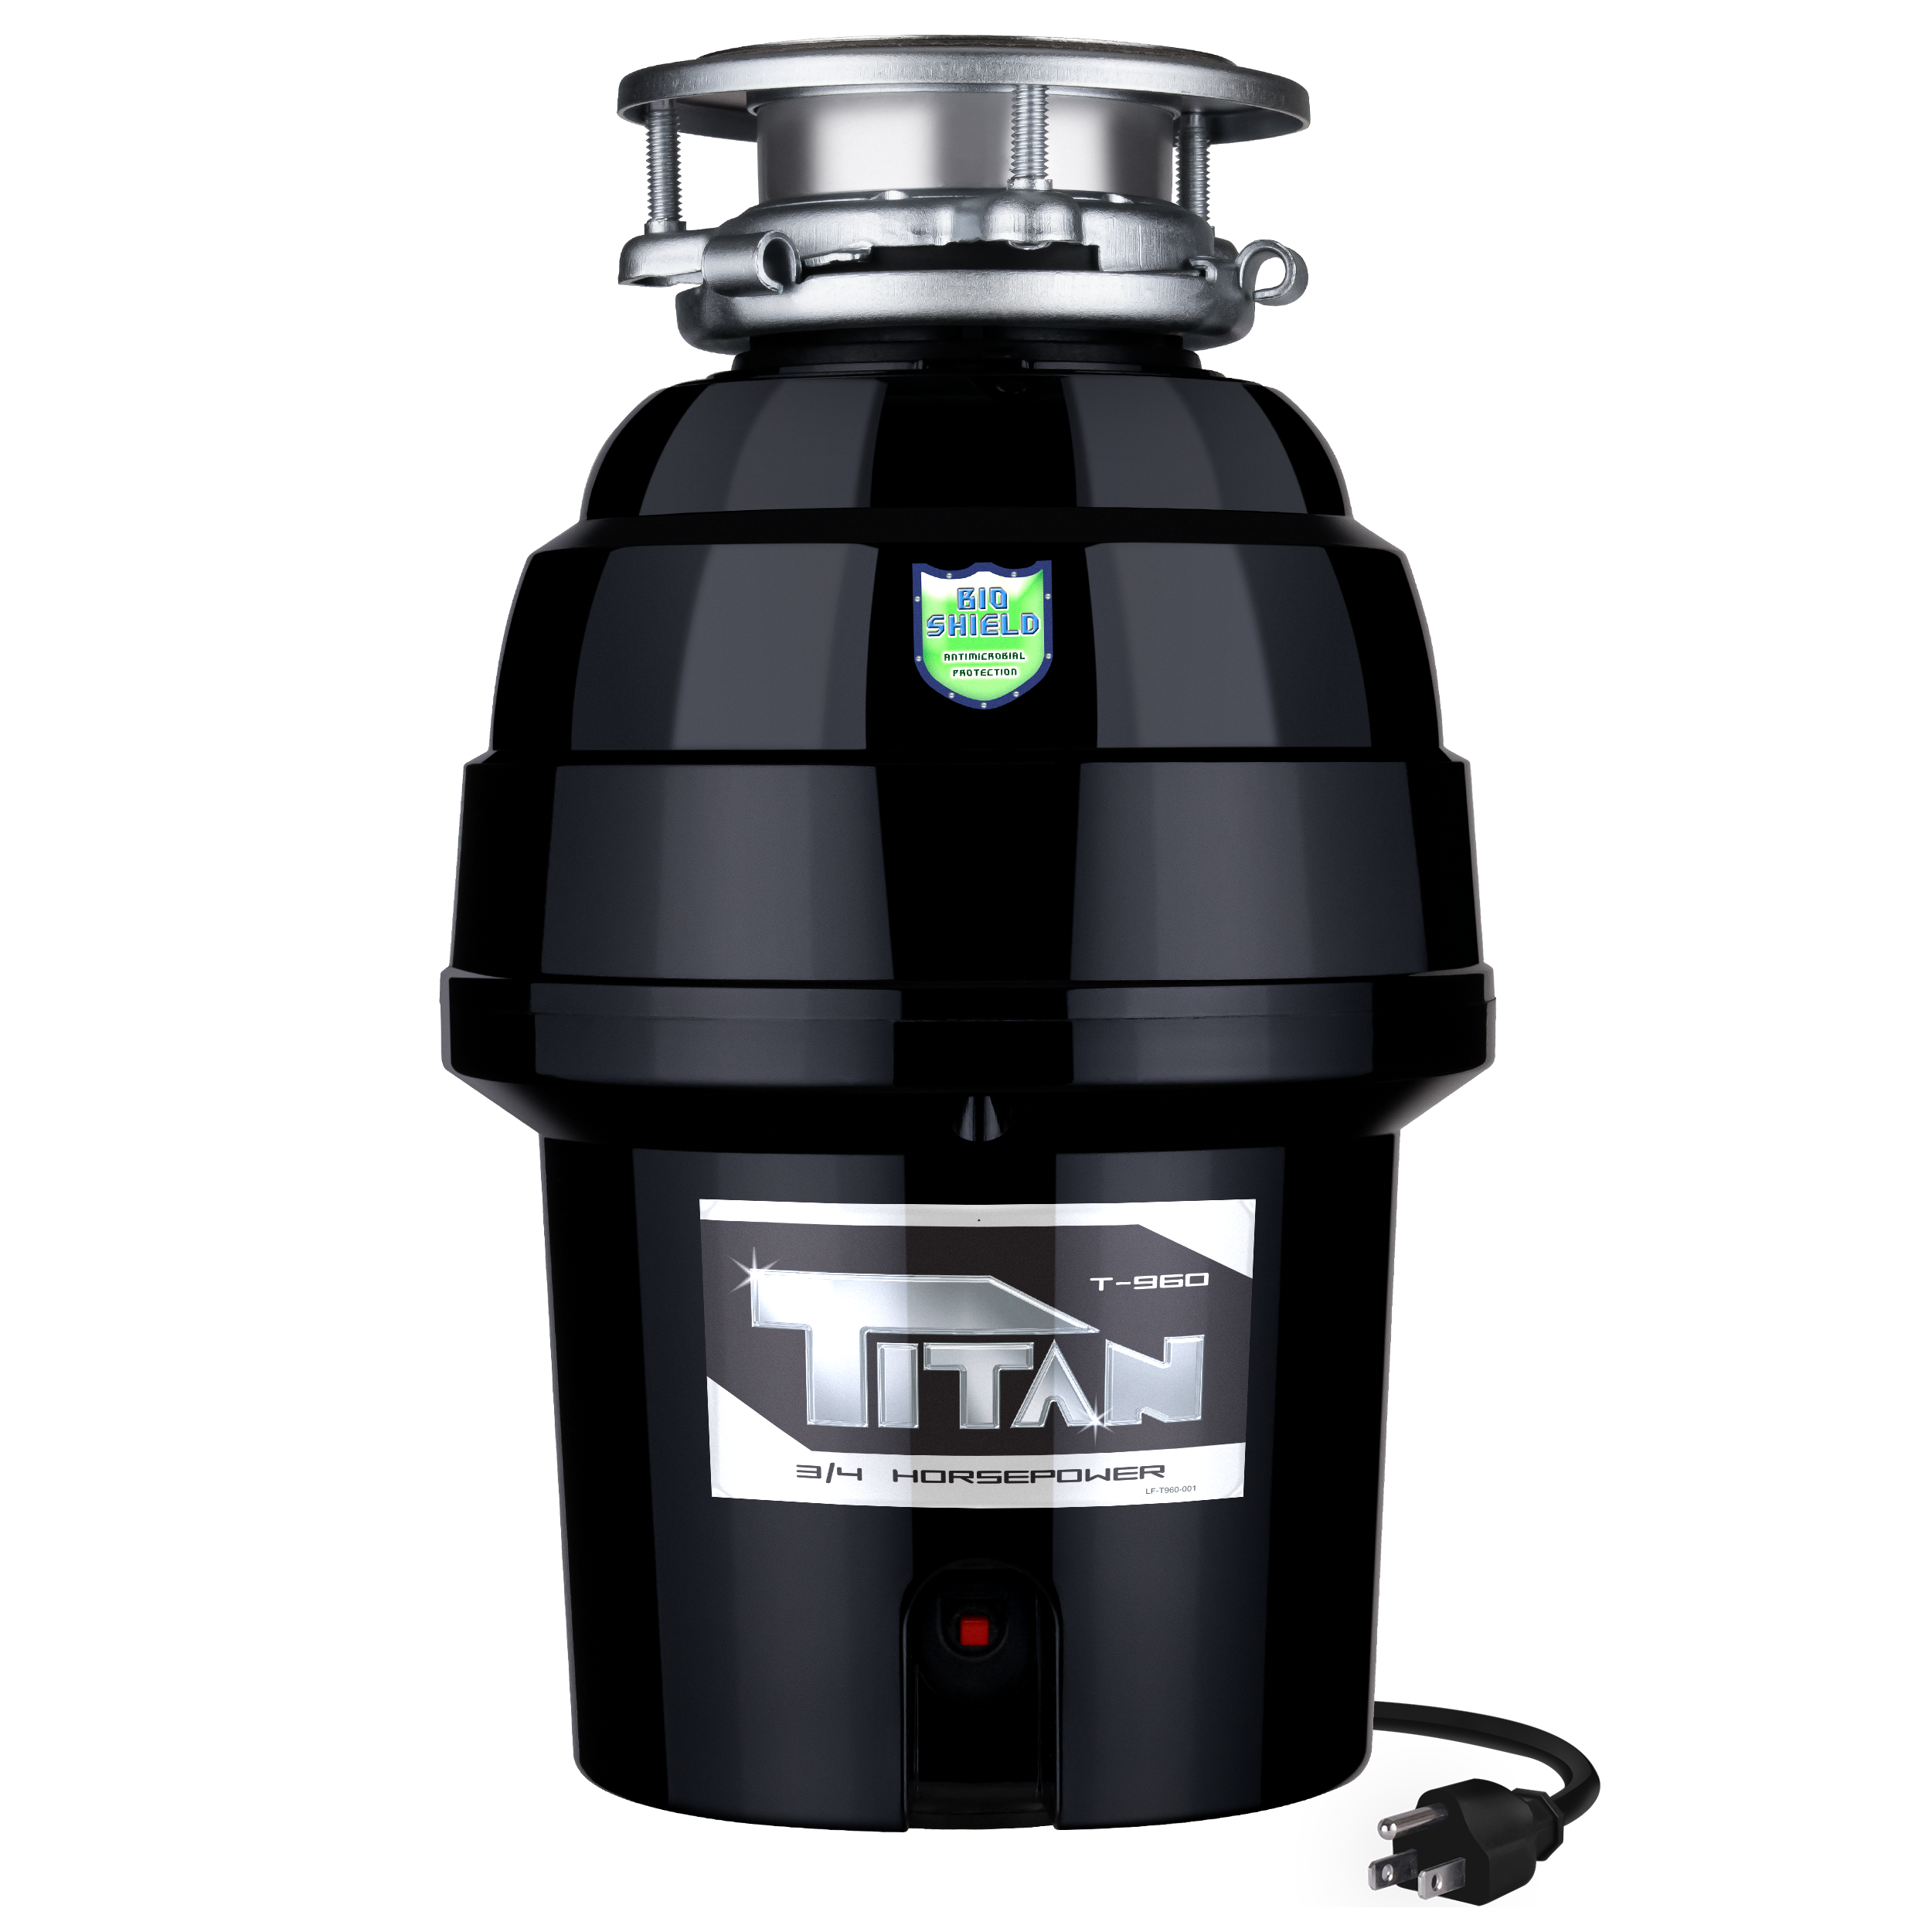 Titan 3/4 HP Deluxe Garbage Disposal with Power Cord and Flange 10-US-TN-960 -3B